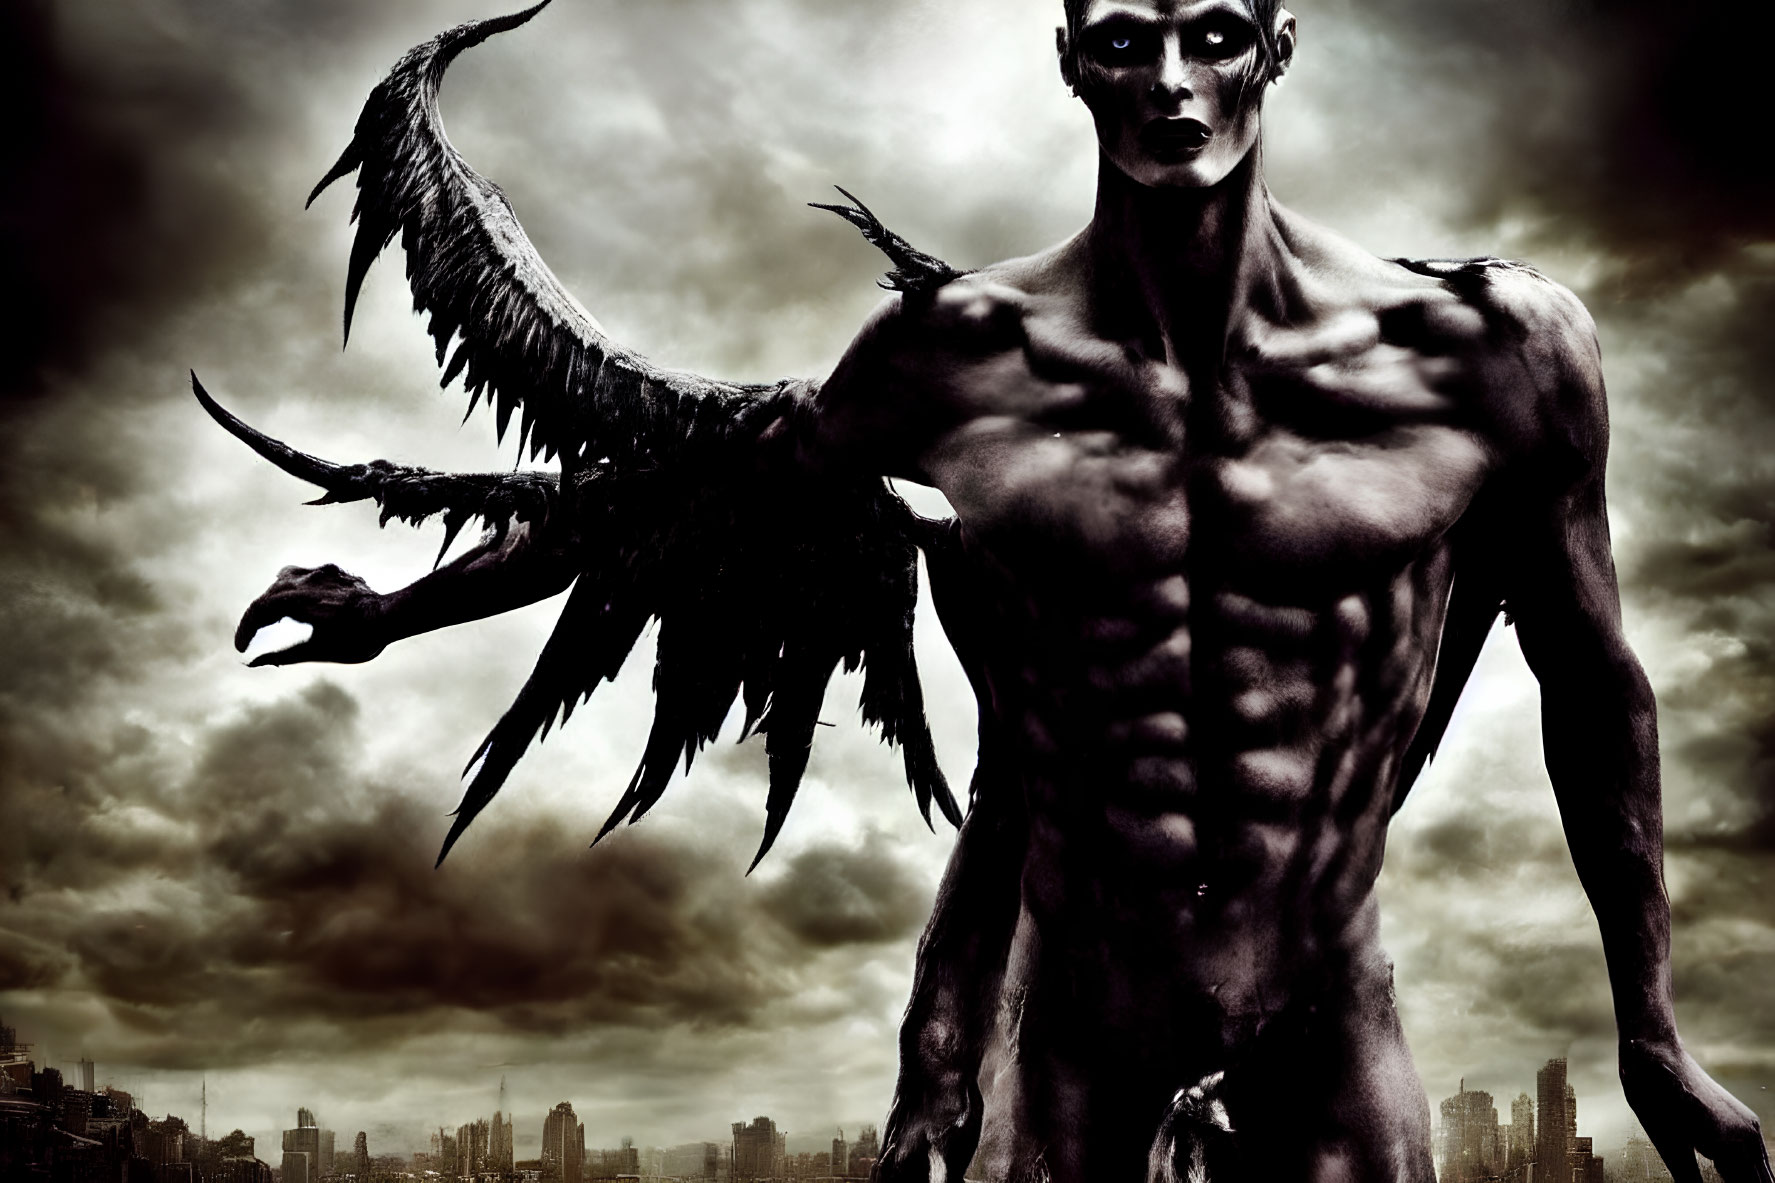 Dark Winged Figure Stands Amid Cloudy Sky and Cityscape